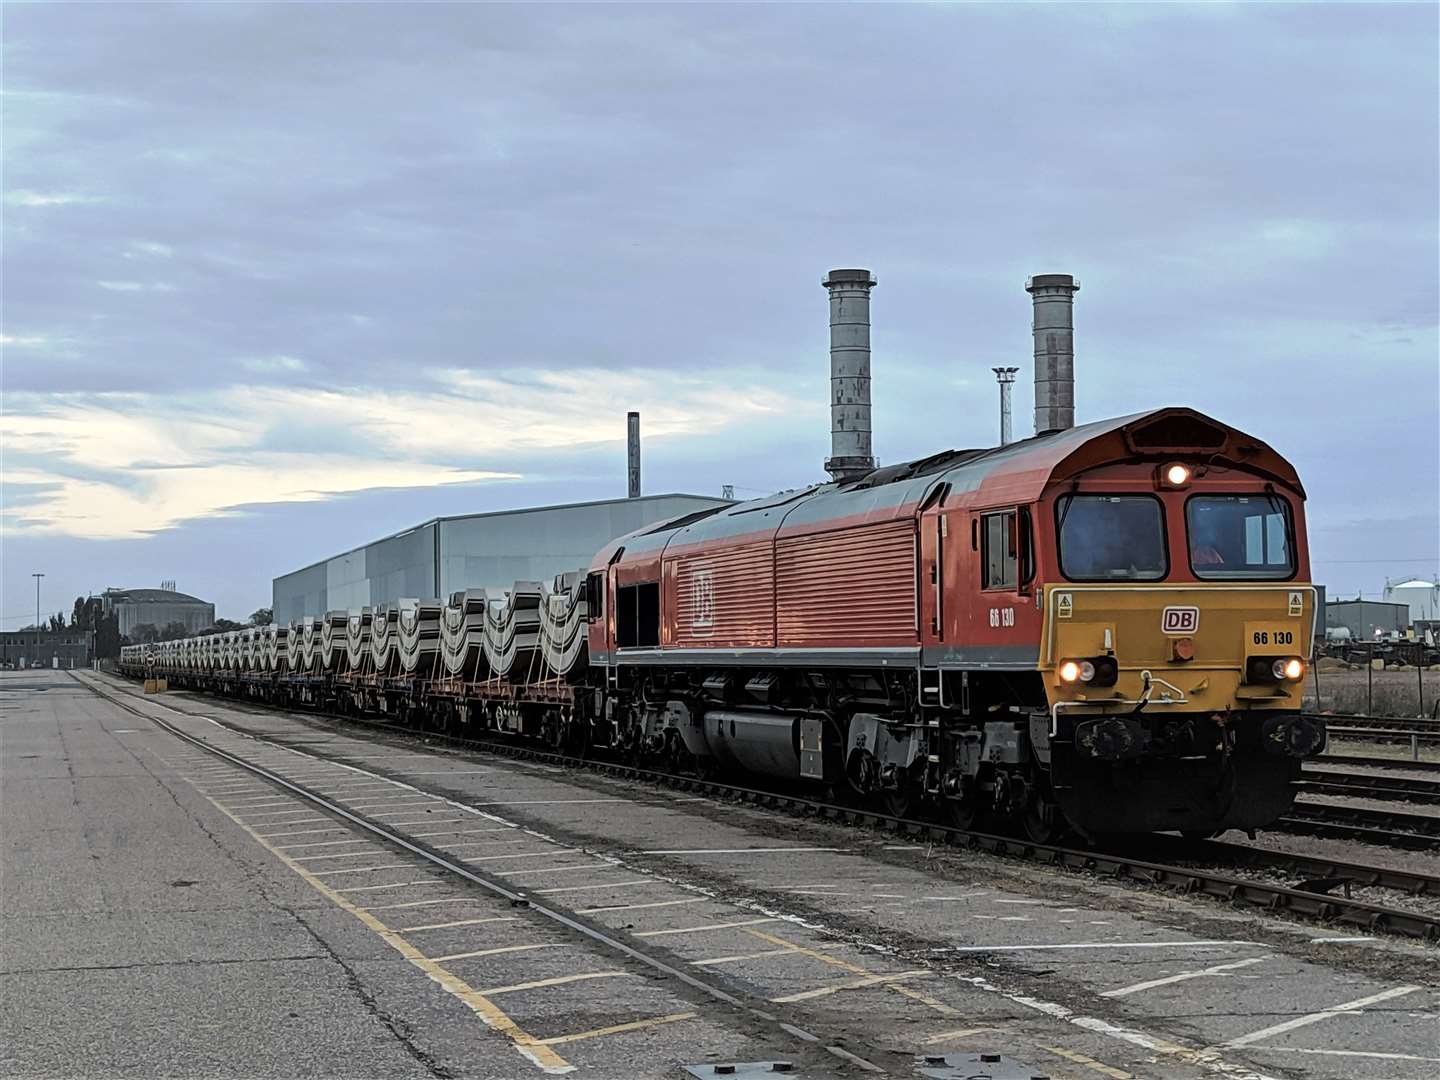 The first train carrying parts for the tunnel of the Thames Tideway arrives at Thamesport on Grain